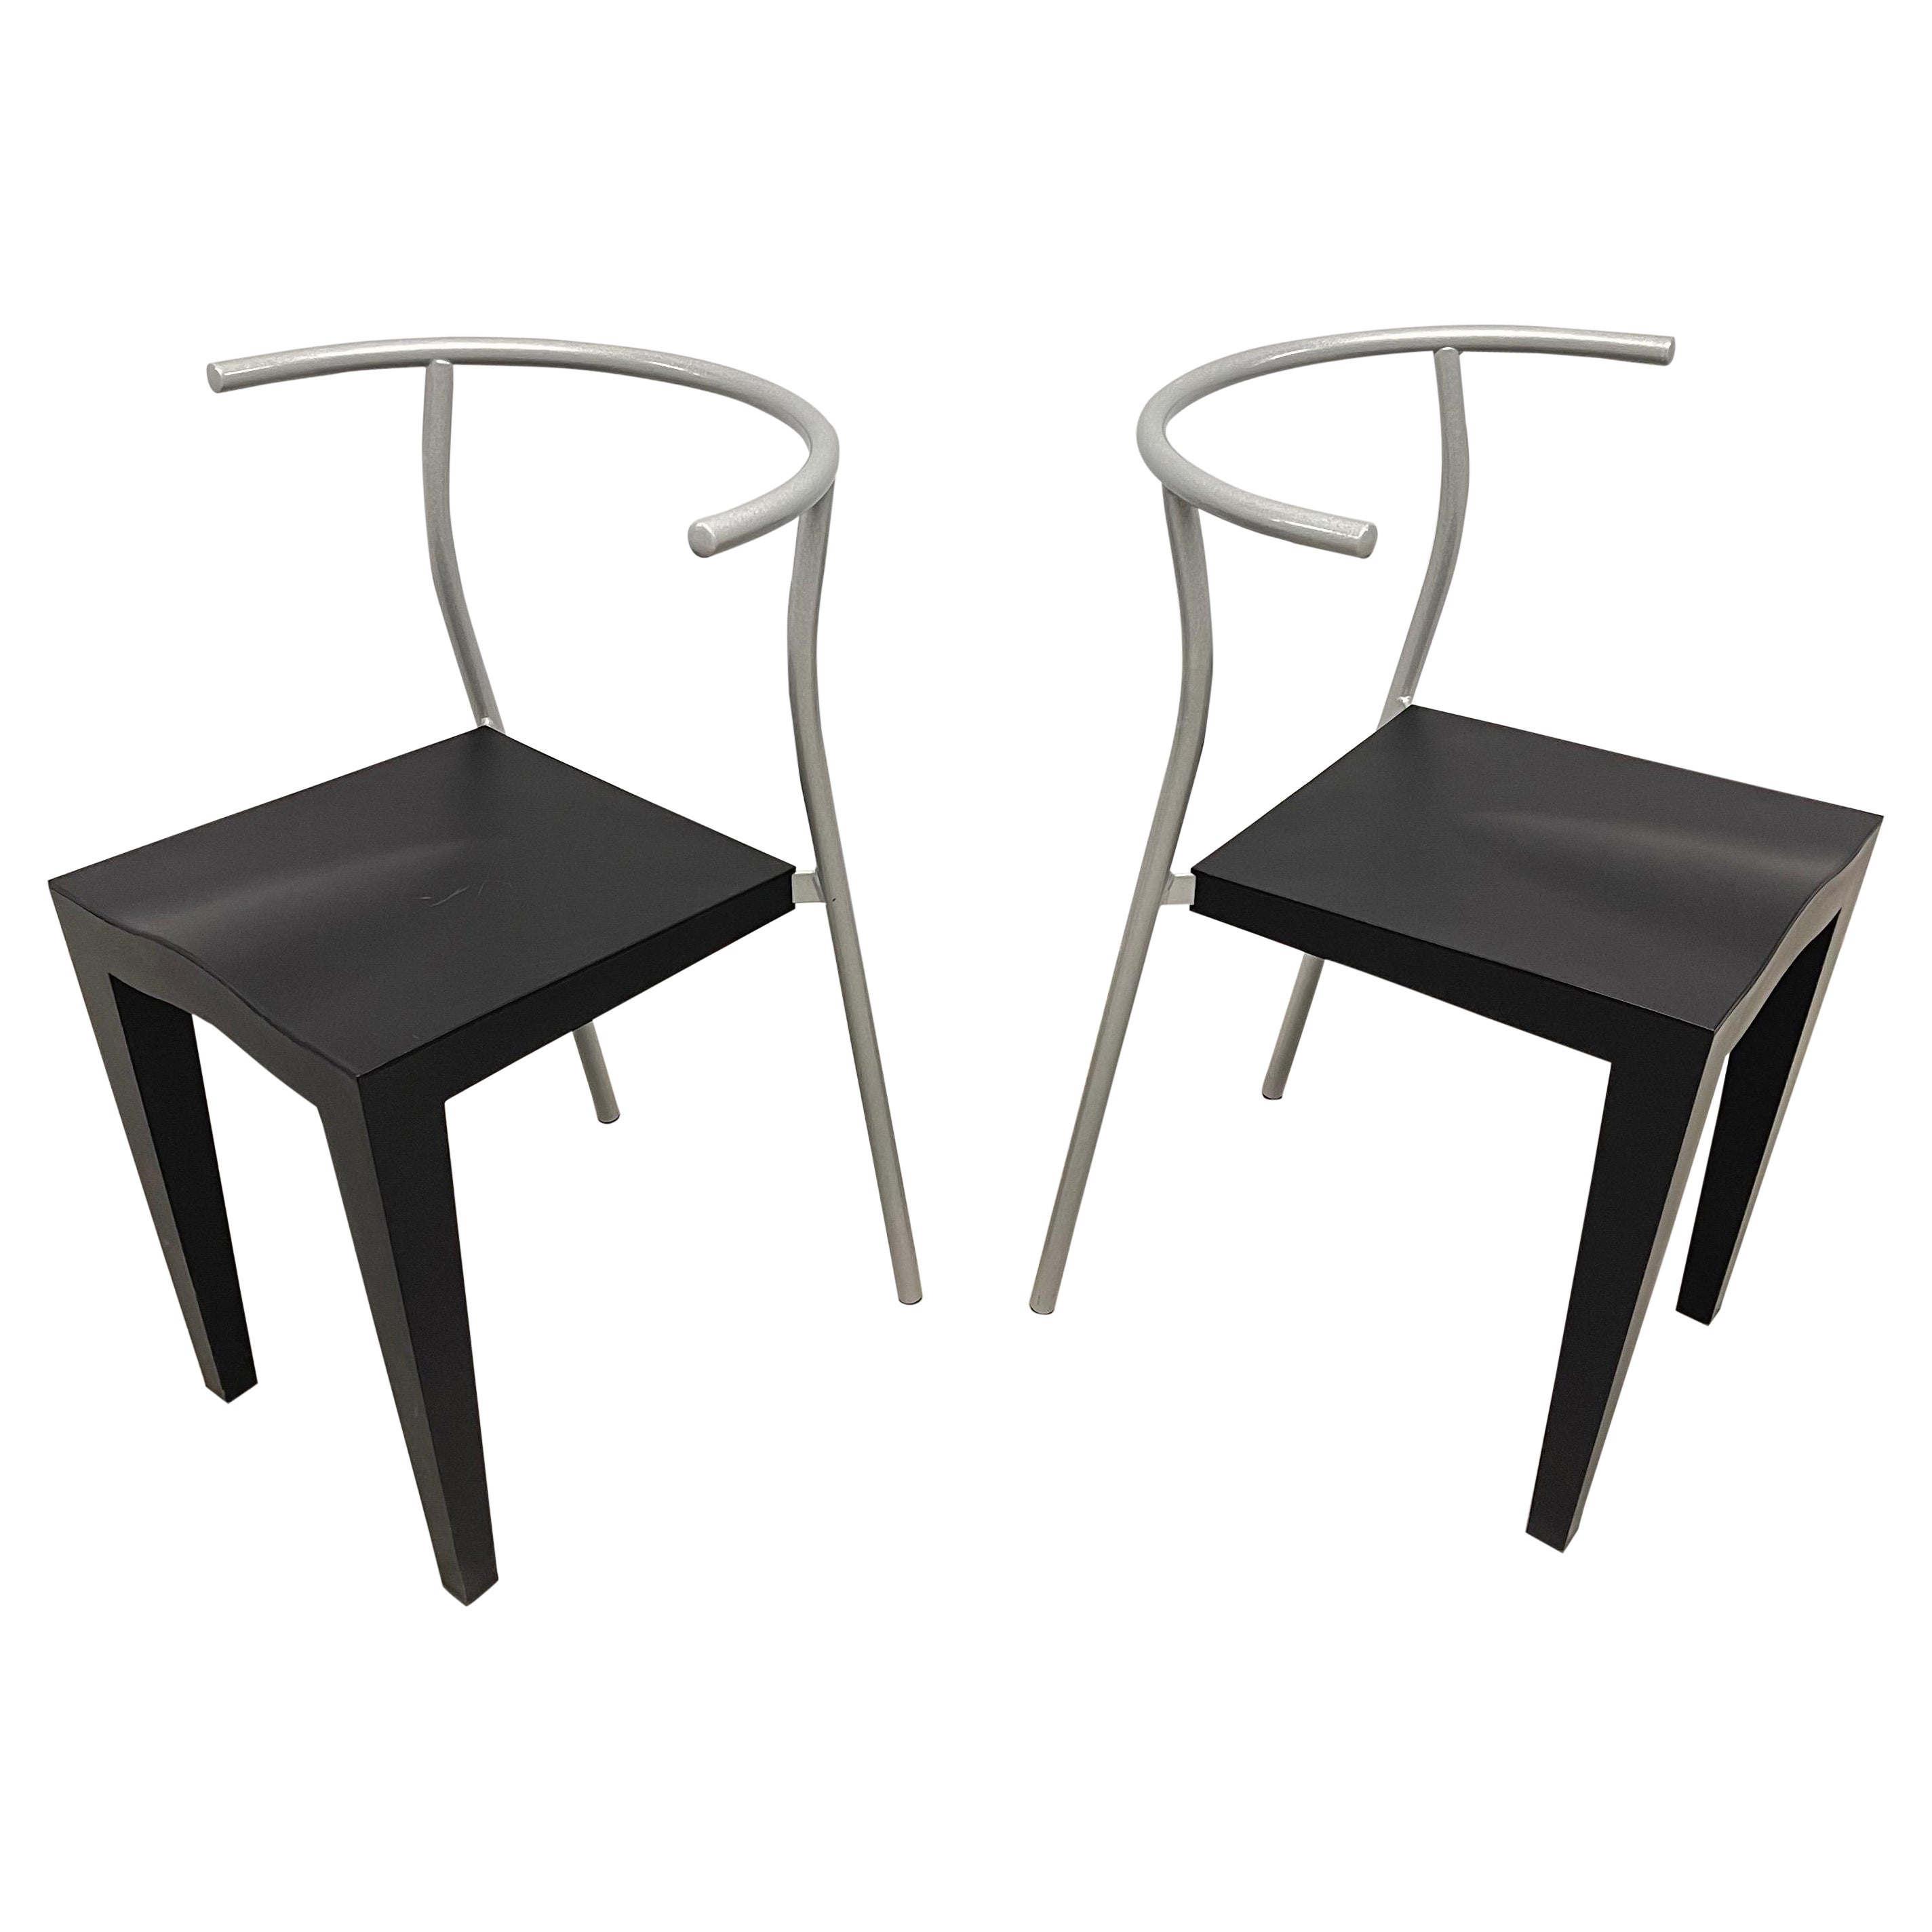 Pair of Postmodern "Dr Glob" Chairs by Philippe Starck for Kartell, Italy, 1990